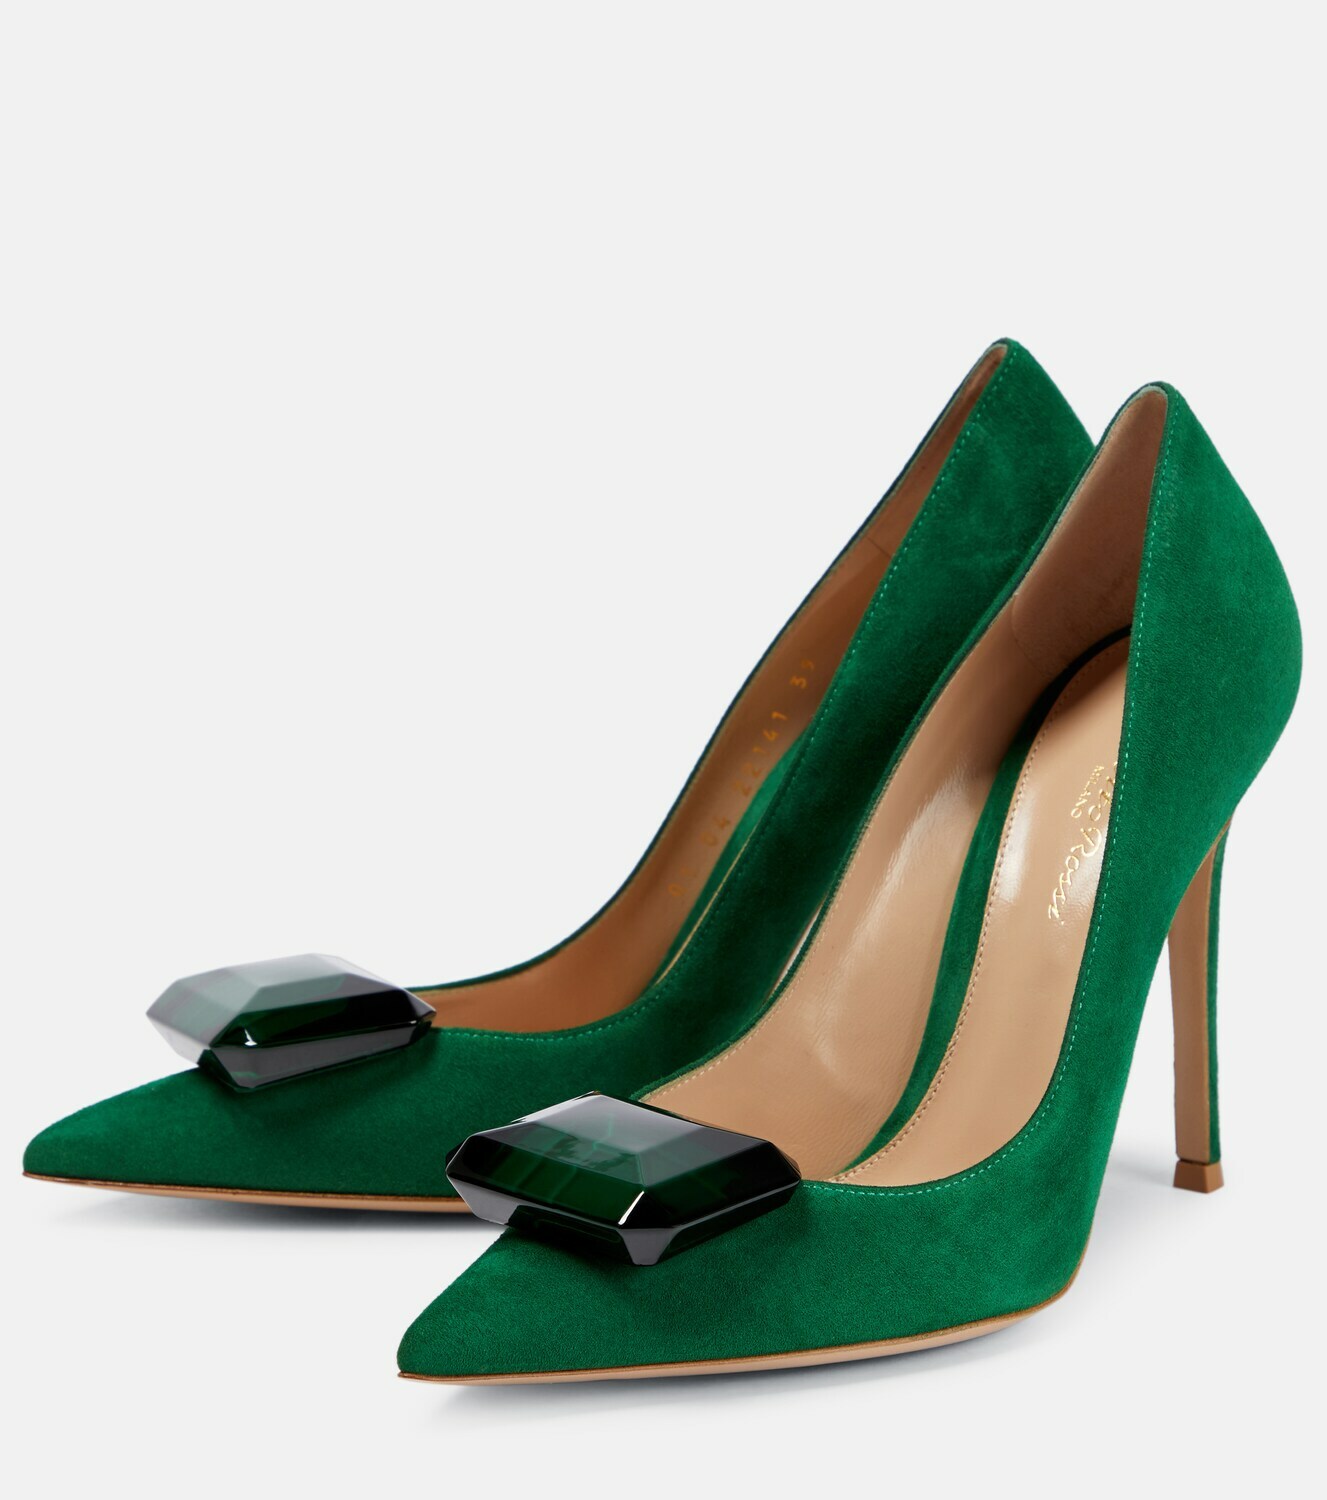 Gianvito Rossi - Jaipur 105 embellished suede pumps Gianvito Rossi